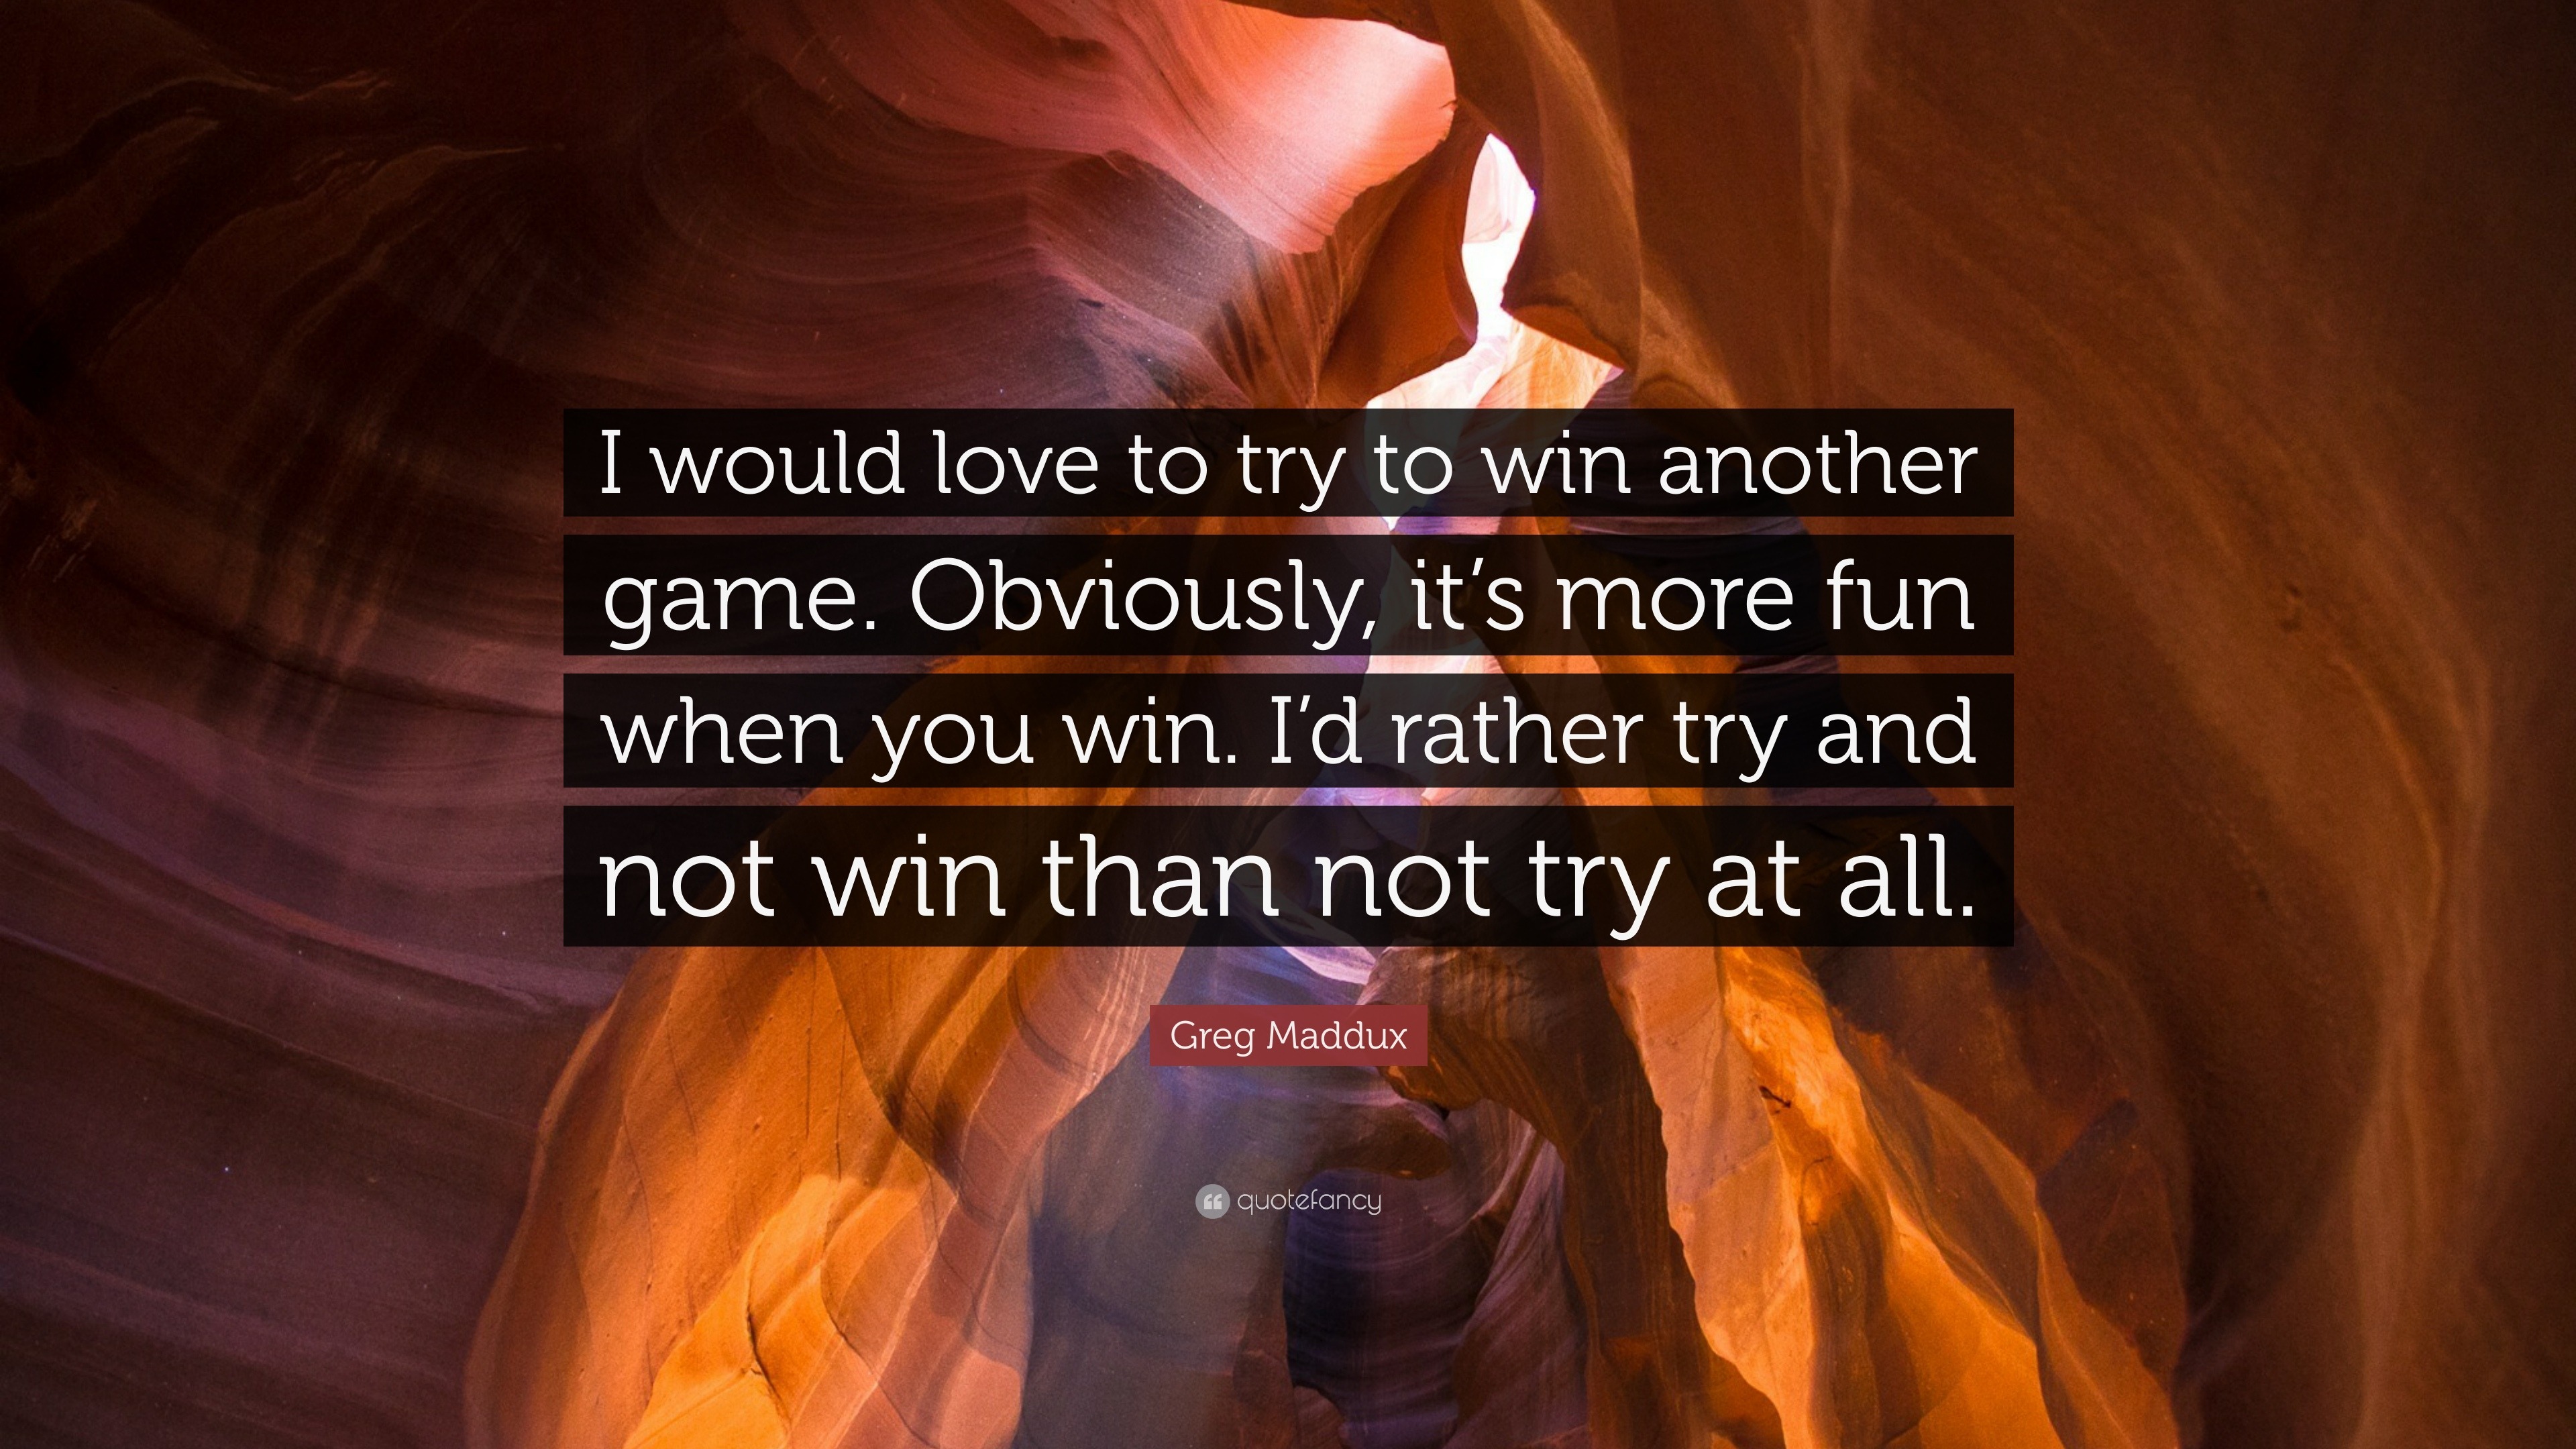 Greg Maddux Quote: “I'd rather try and not win than not try at all.”